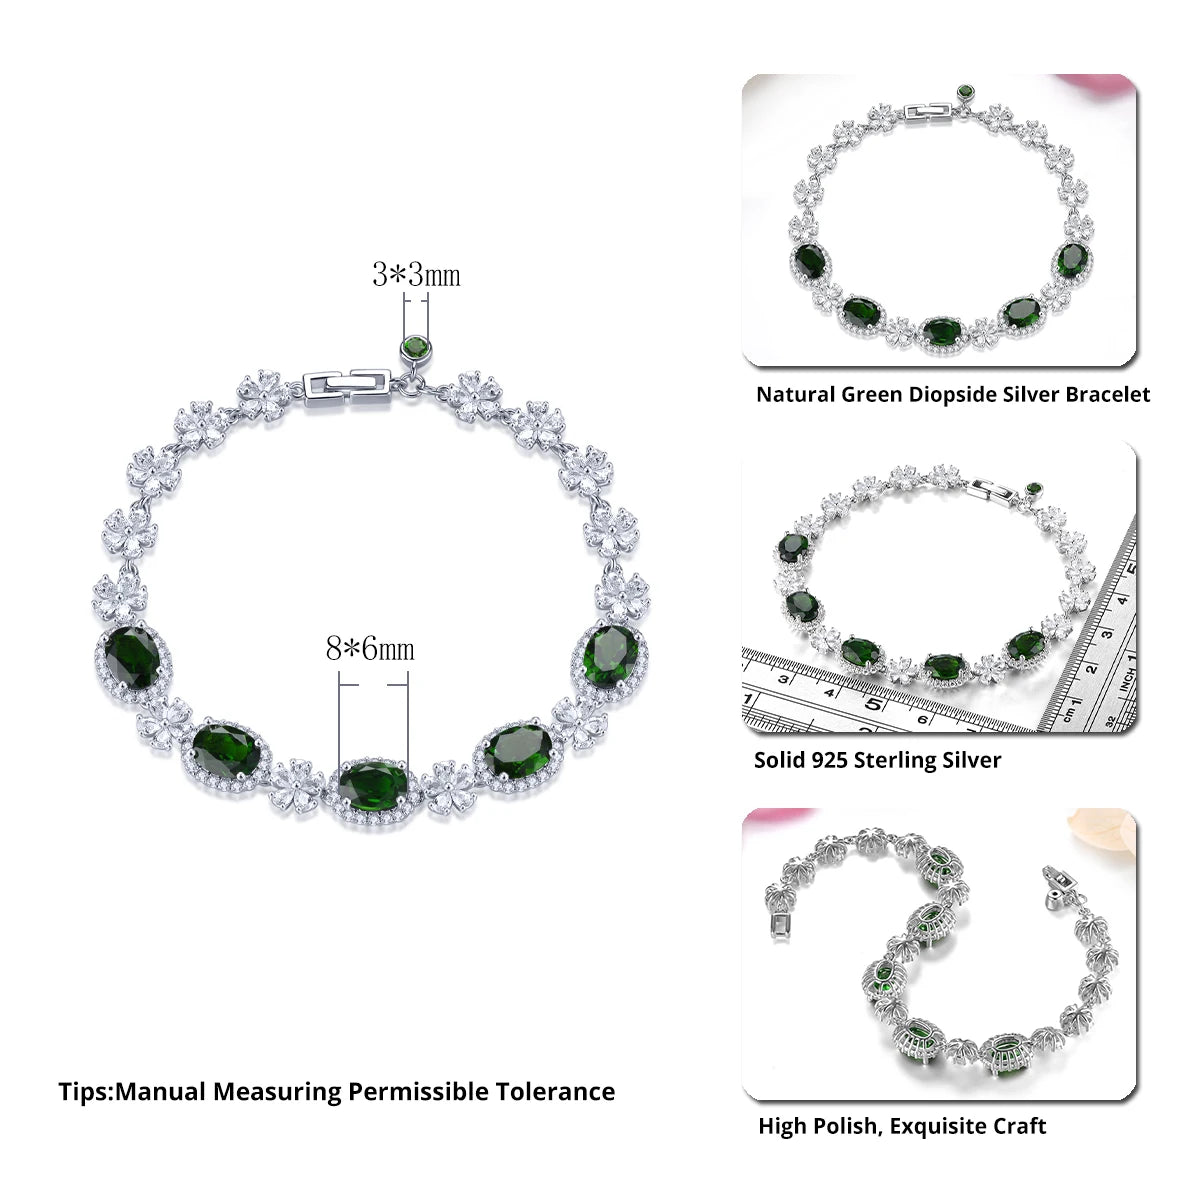 Natural Chrome Diopside Sterling Silver Bracelets 6.8 Carats Genuine Gemstone Classic Romantic Daily Style Women's Fine Jewelrys